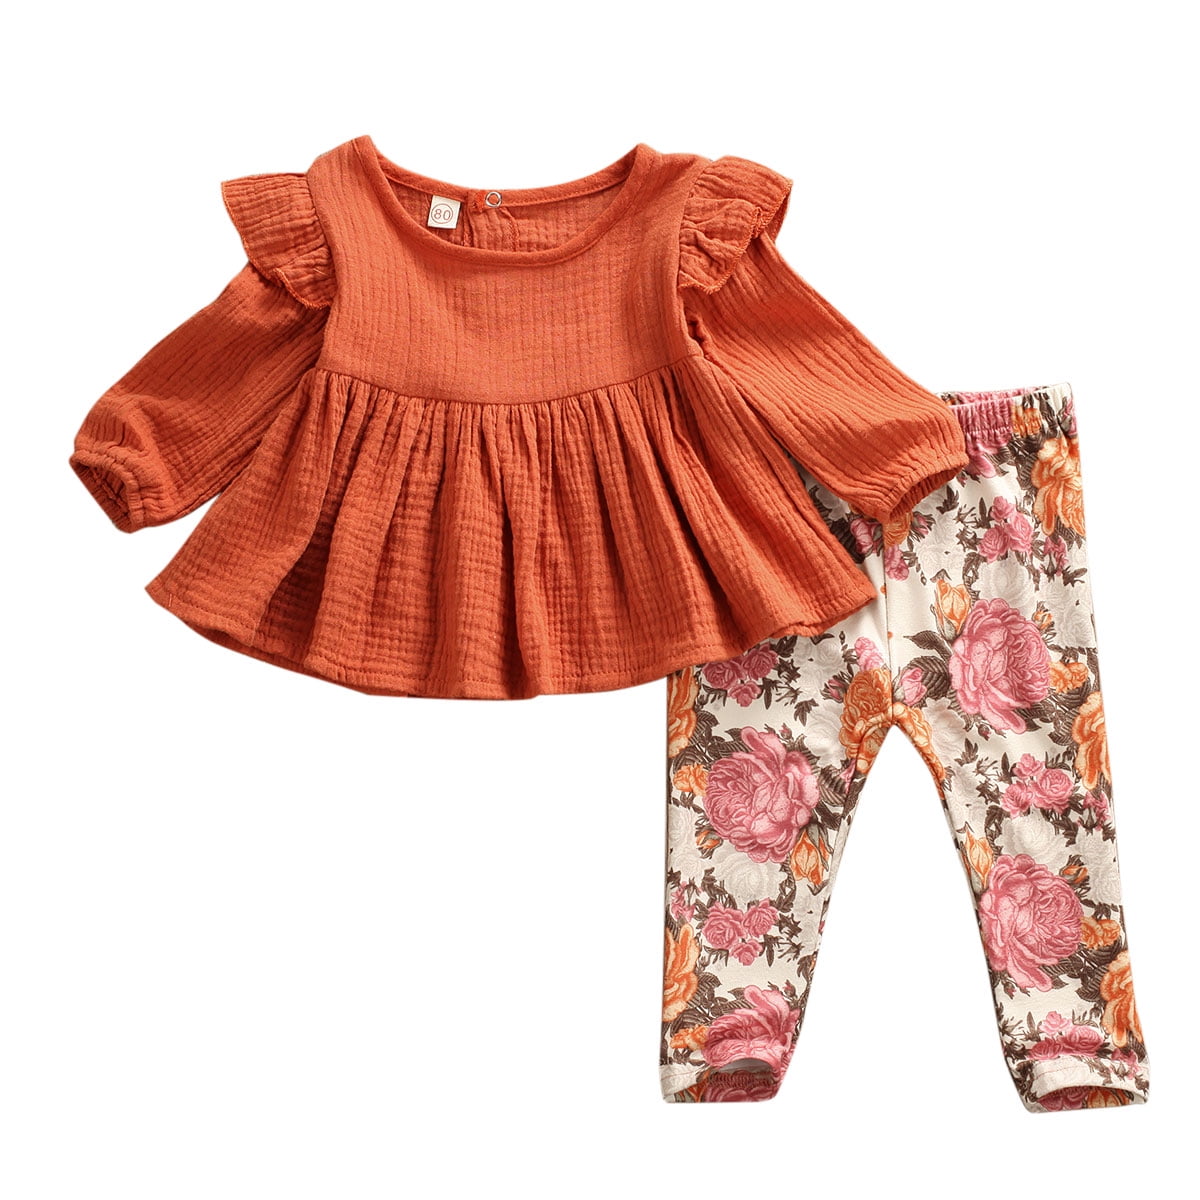 Toddler Baby Girl Outfits Floral Ruffle Flare Tunic Dress Top